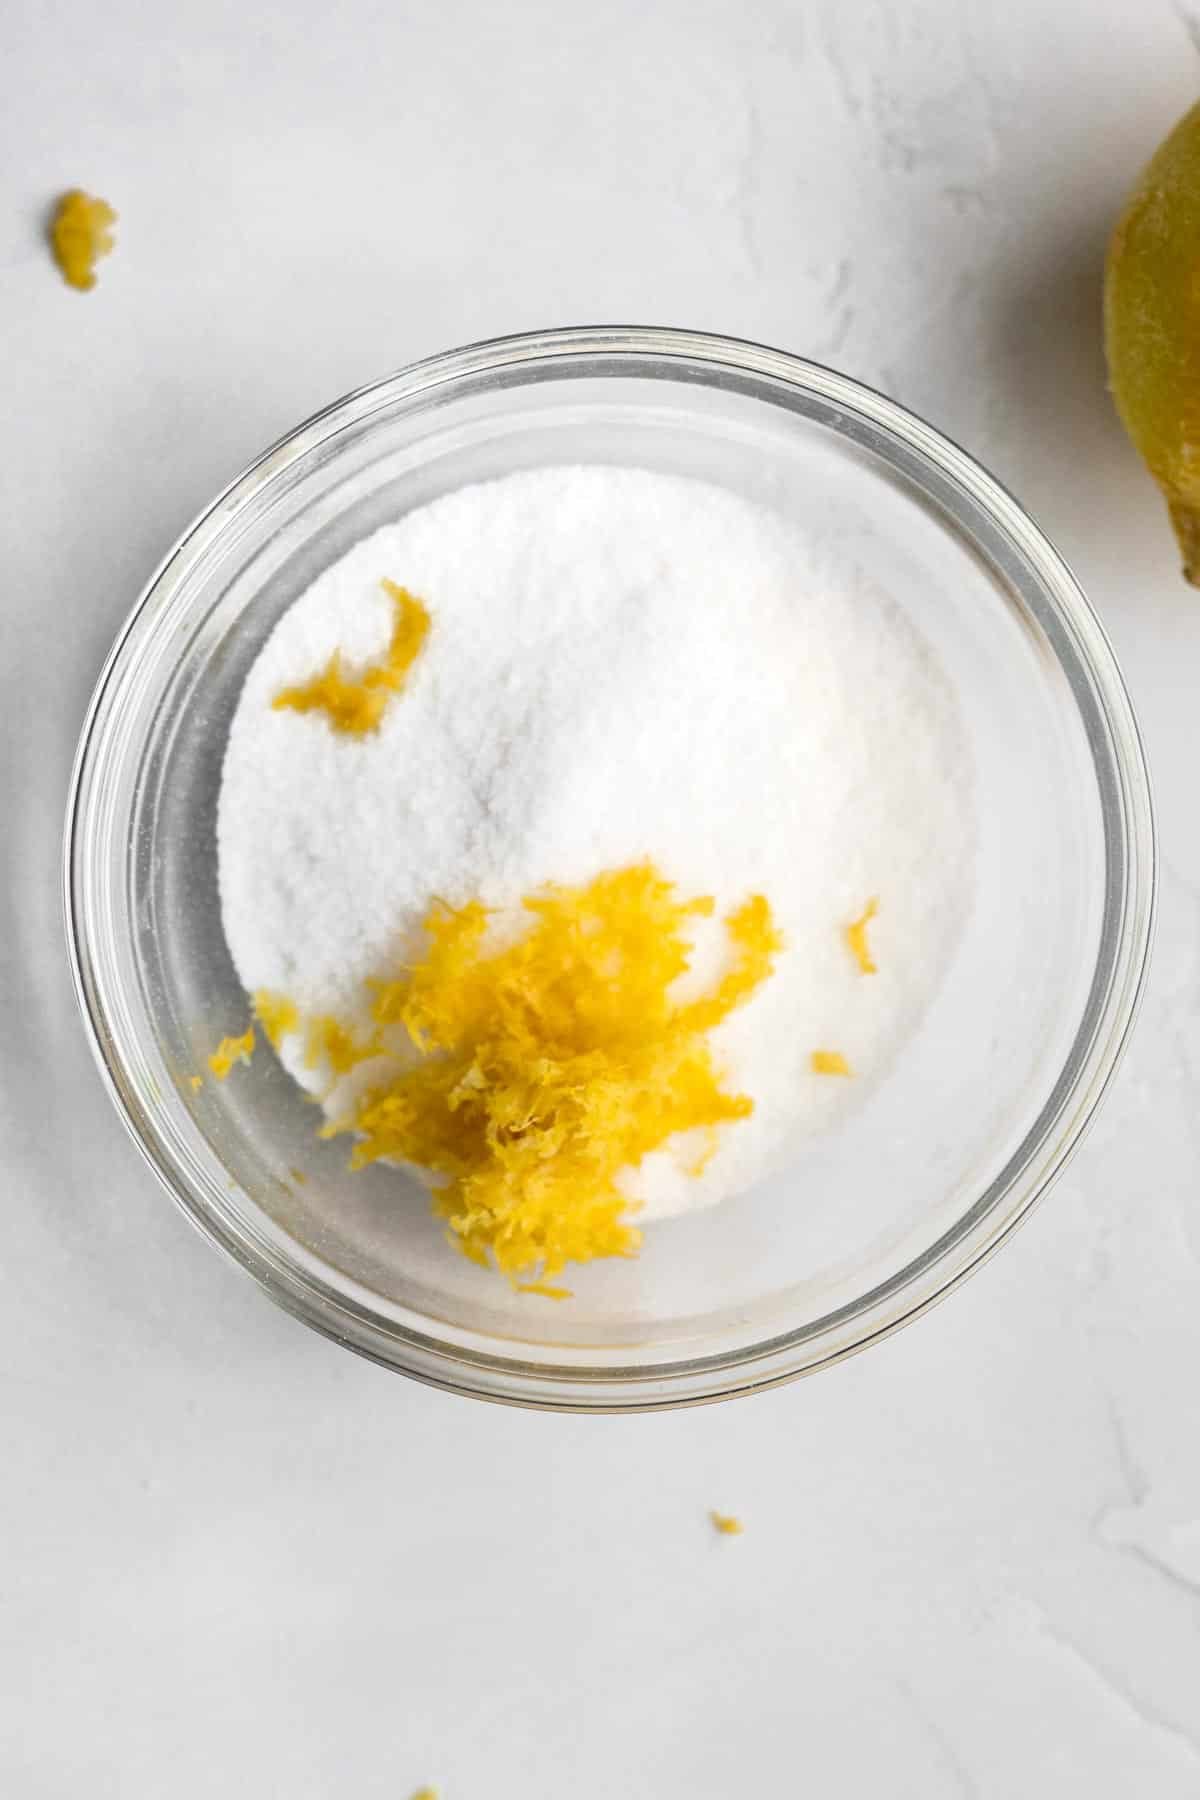 Bright yellow zest on a white desert of granulated sugar.